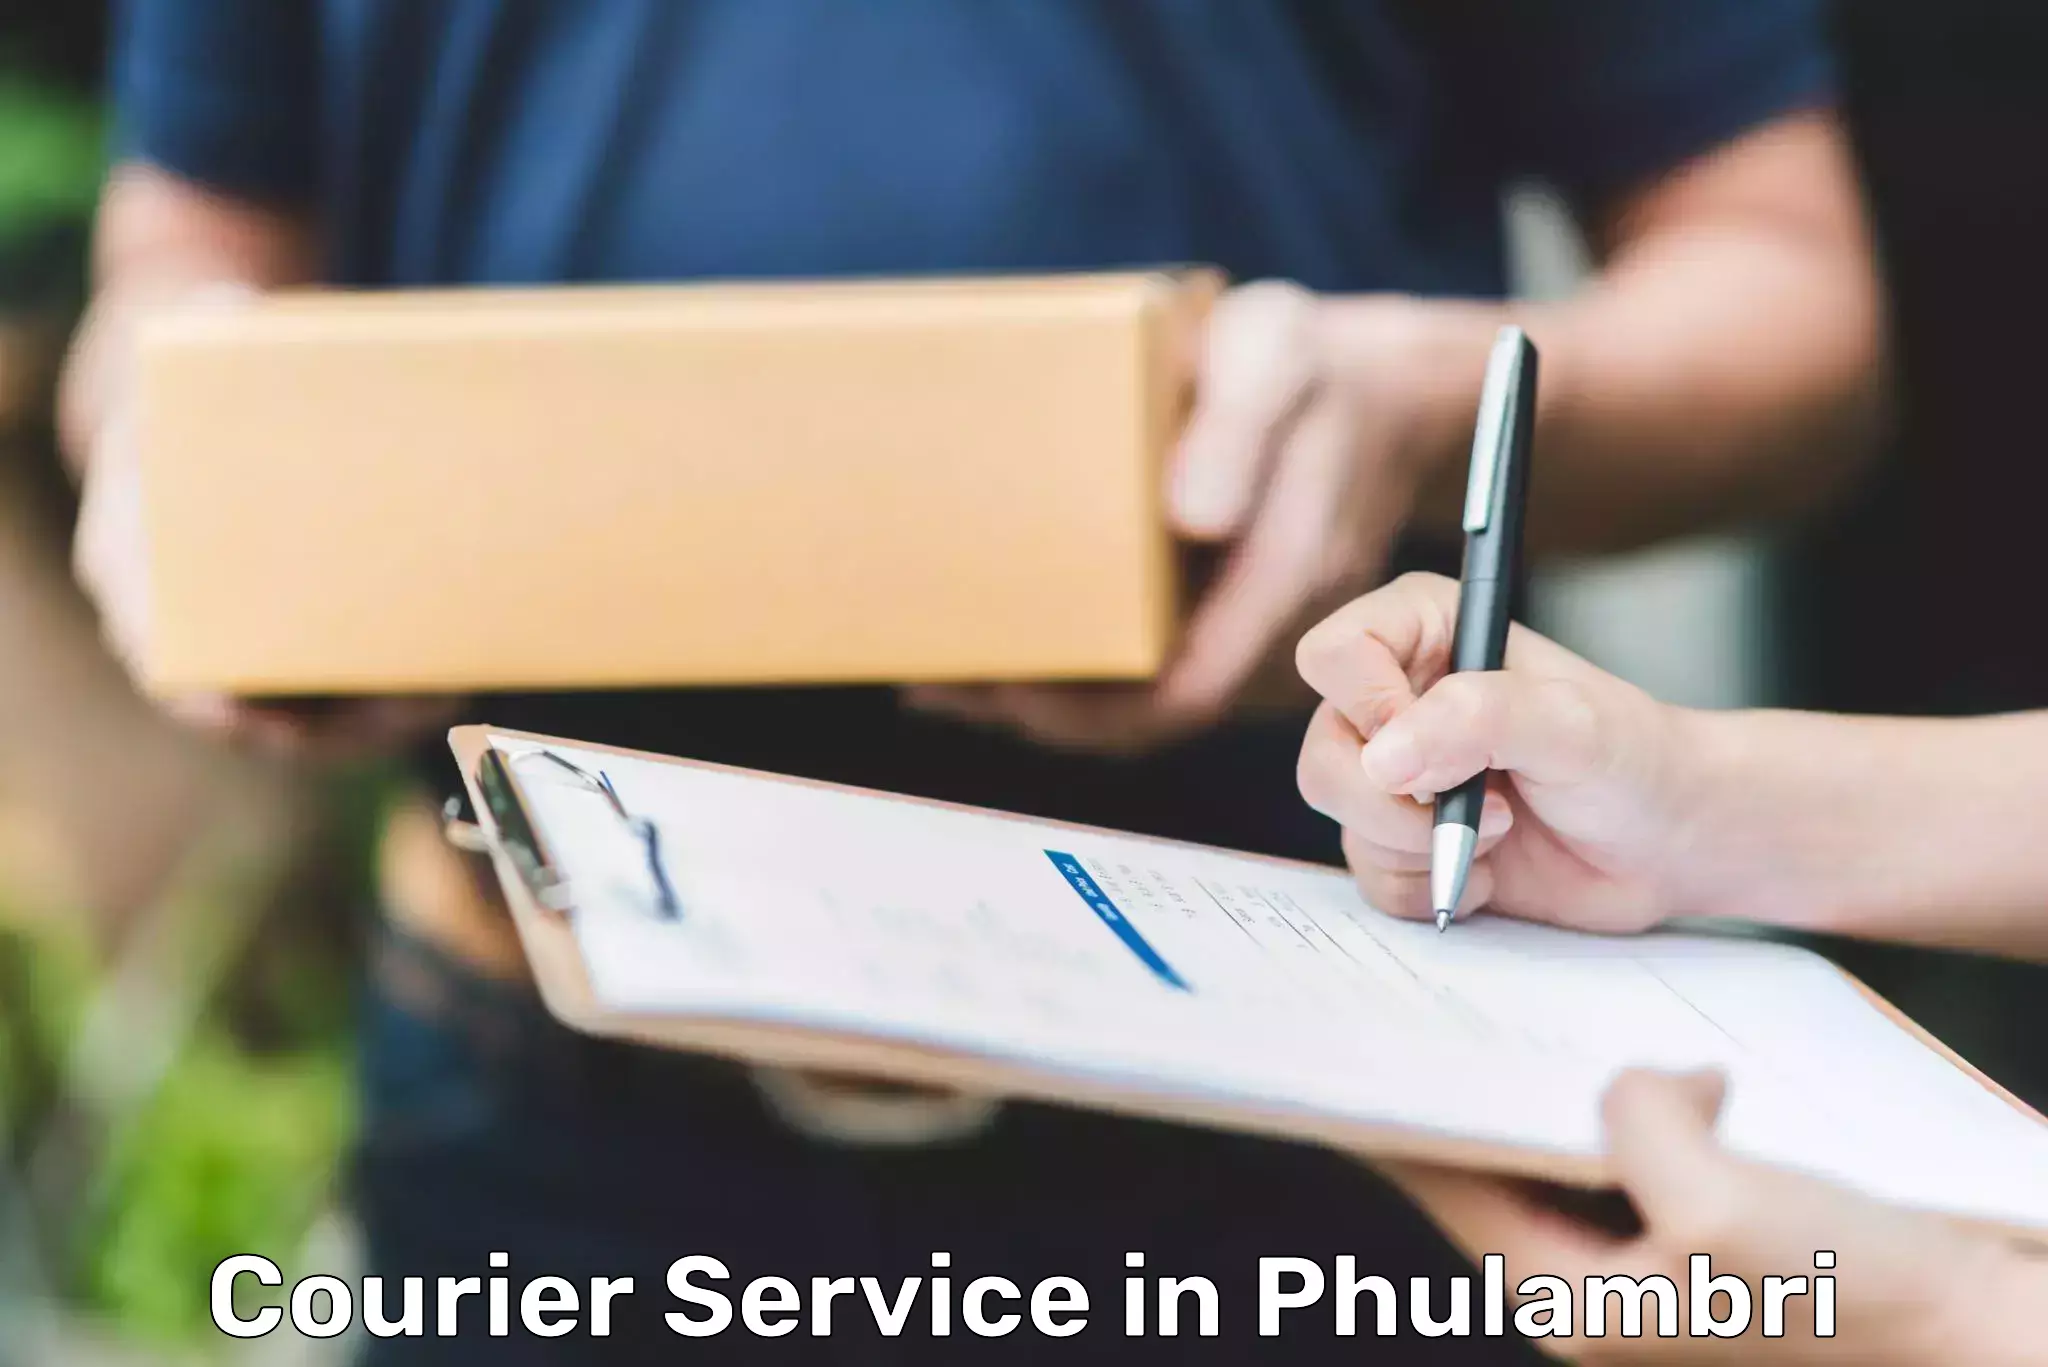 Business delivery service in Phulambri